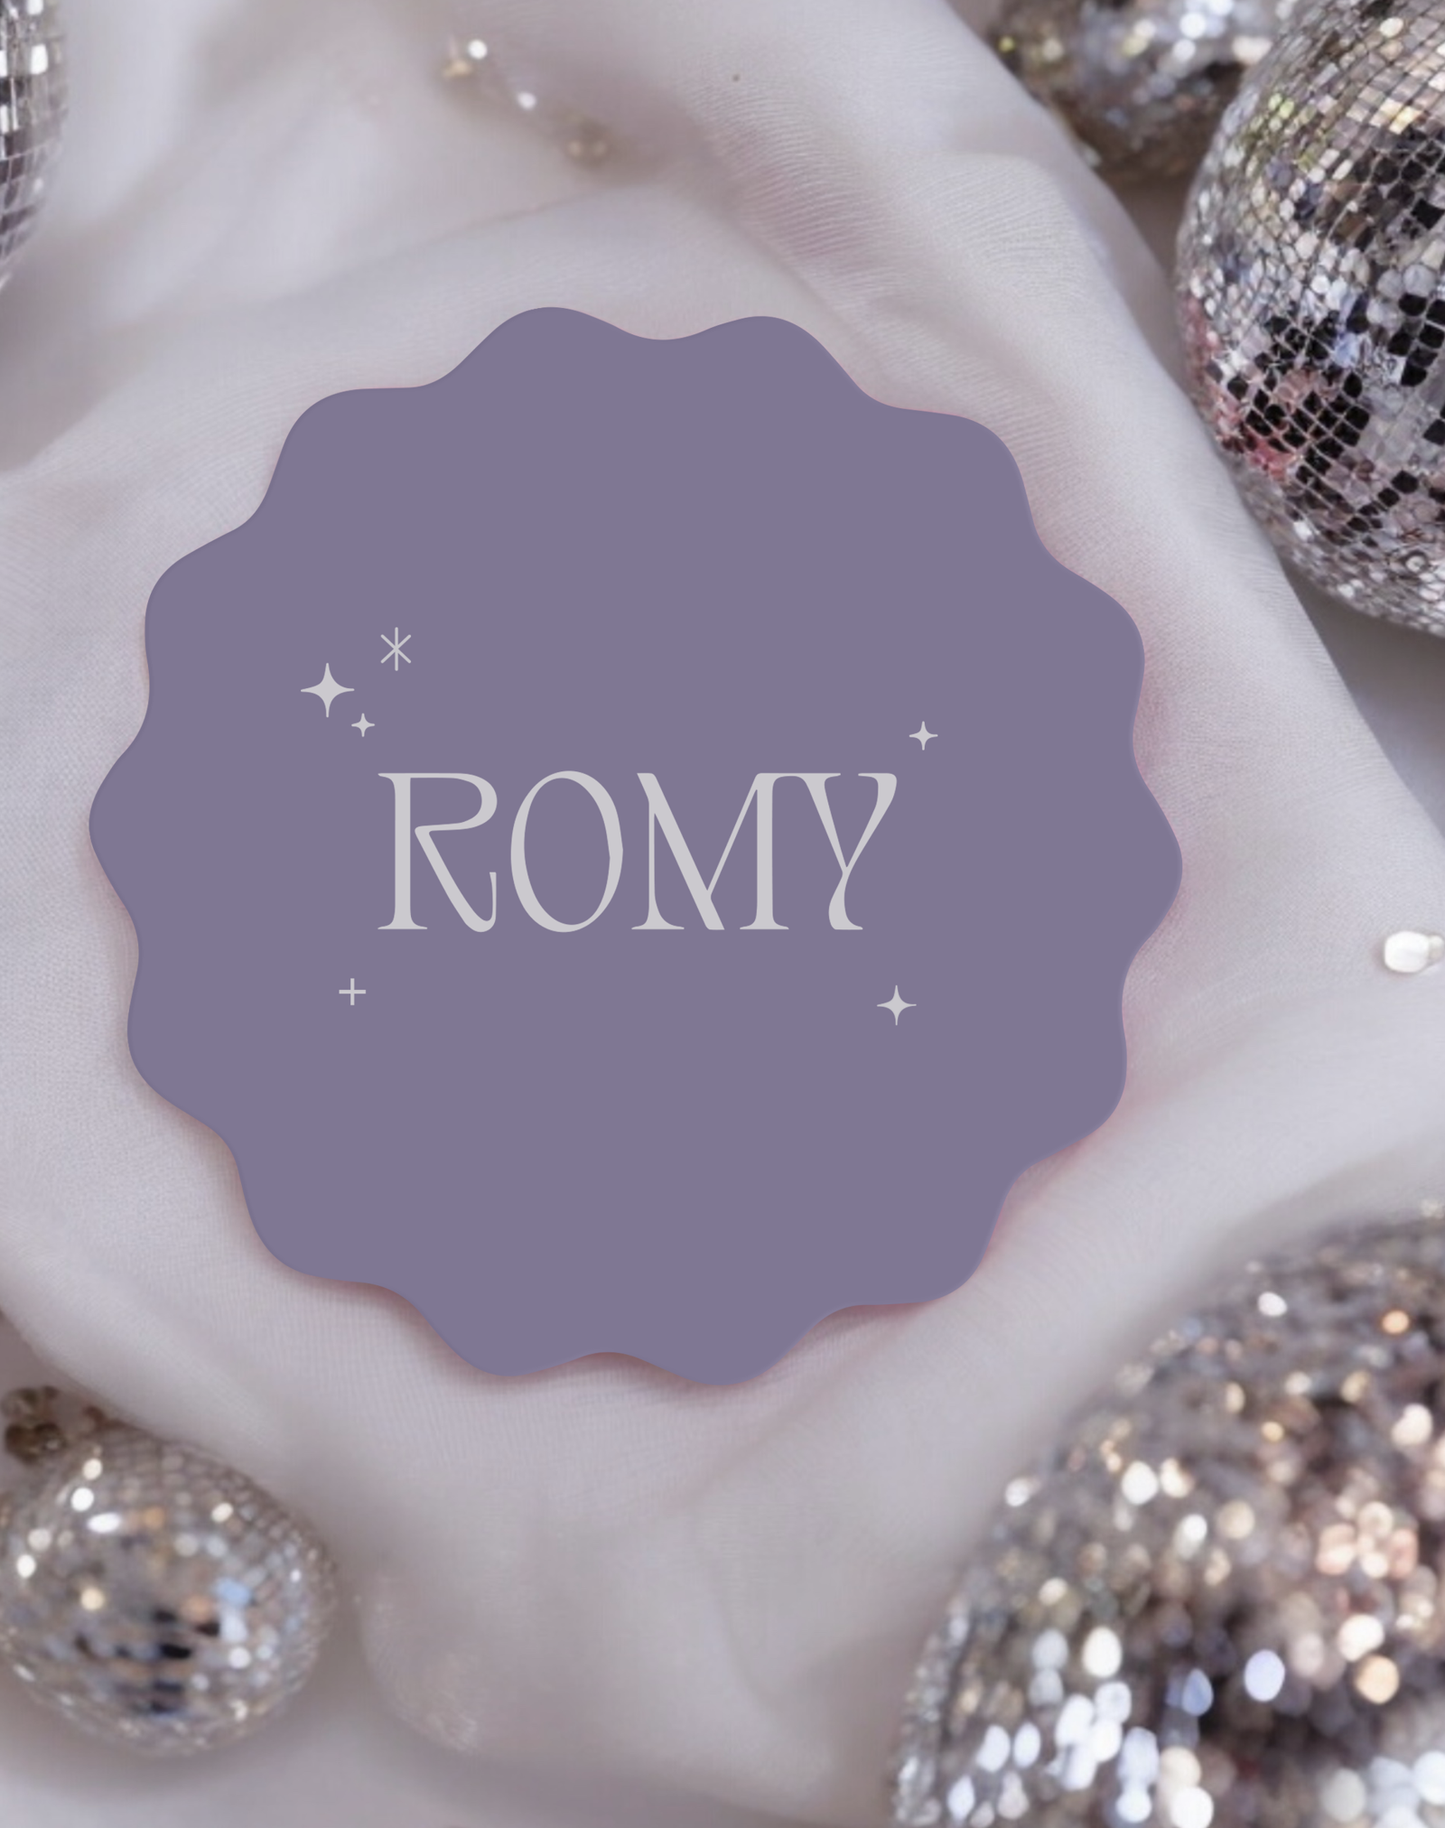 Romy | Fun Place Card - Ivy and Gold Wedding Stationery -  